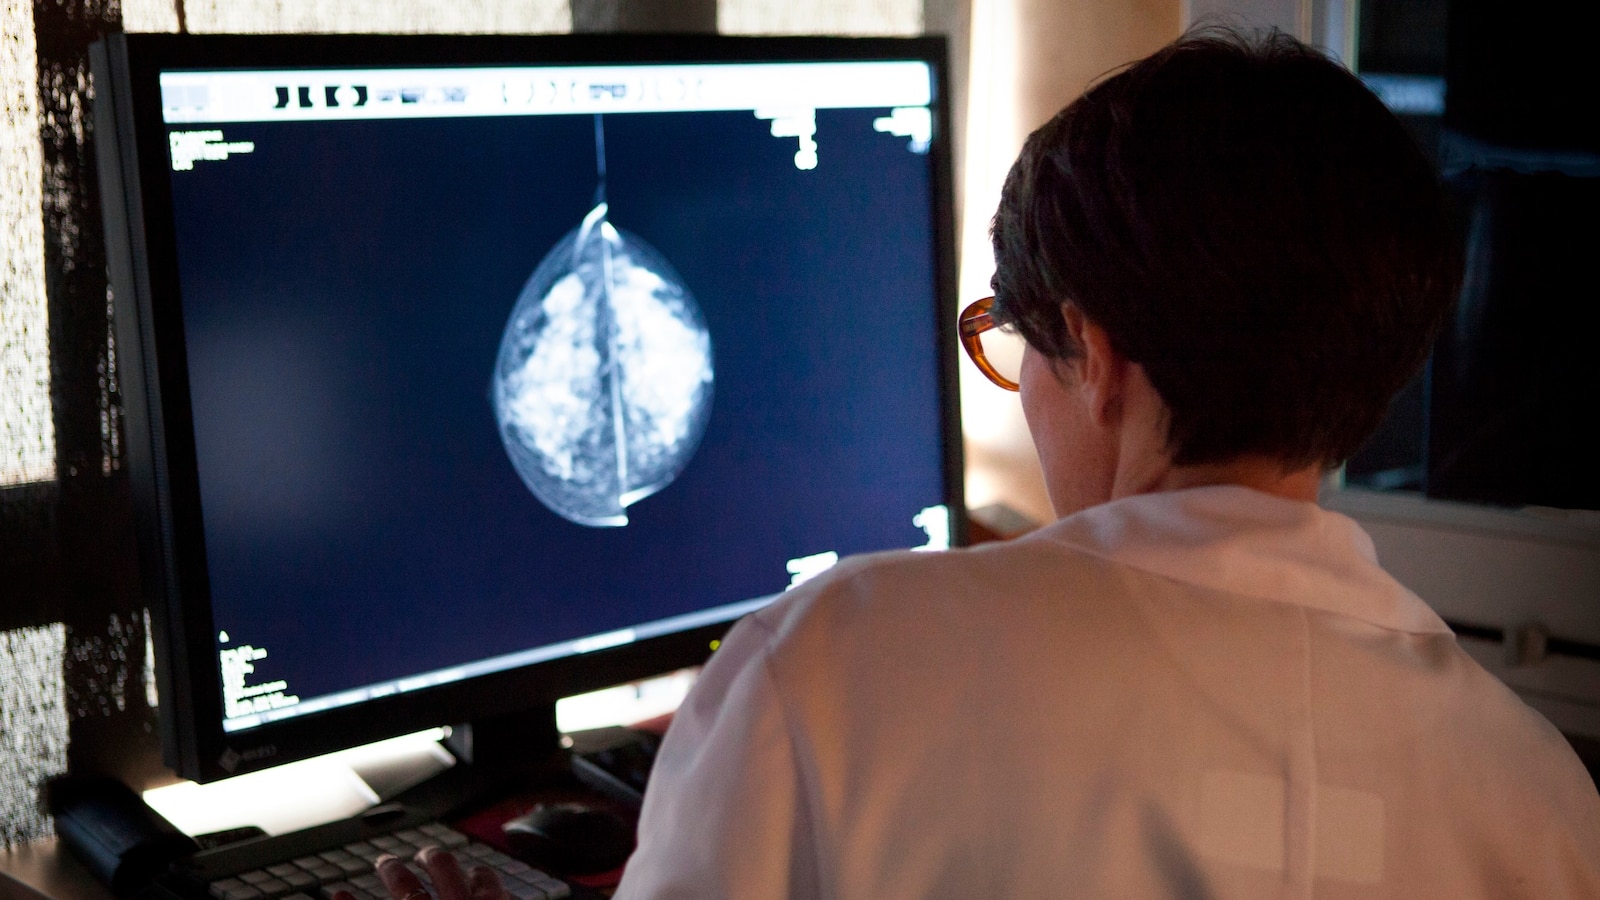 About one-third of socially vulnerable women missing recommended mammograms: CDC [Video]